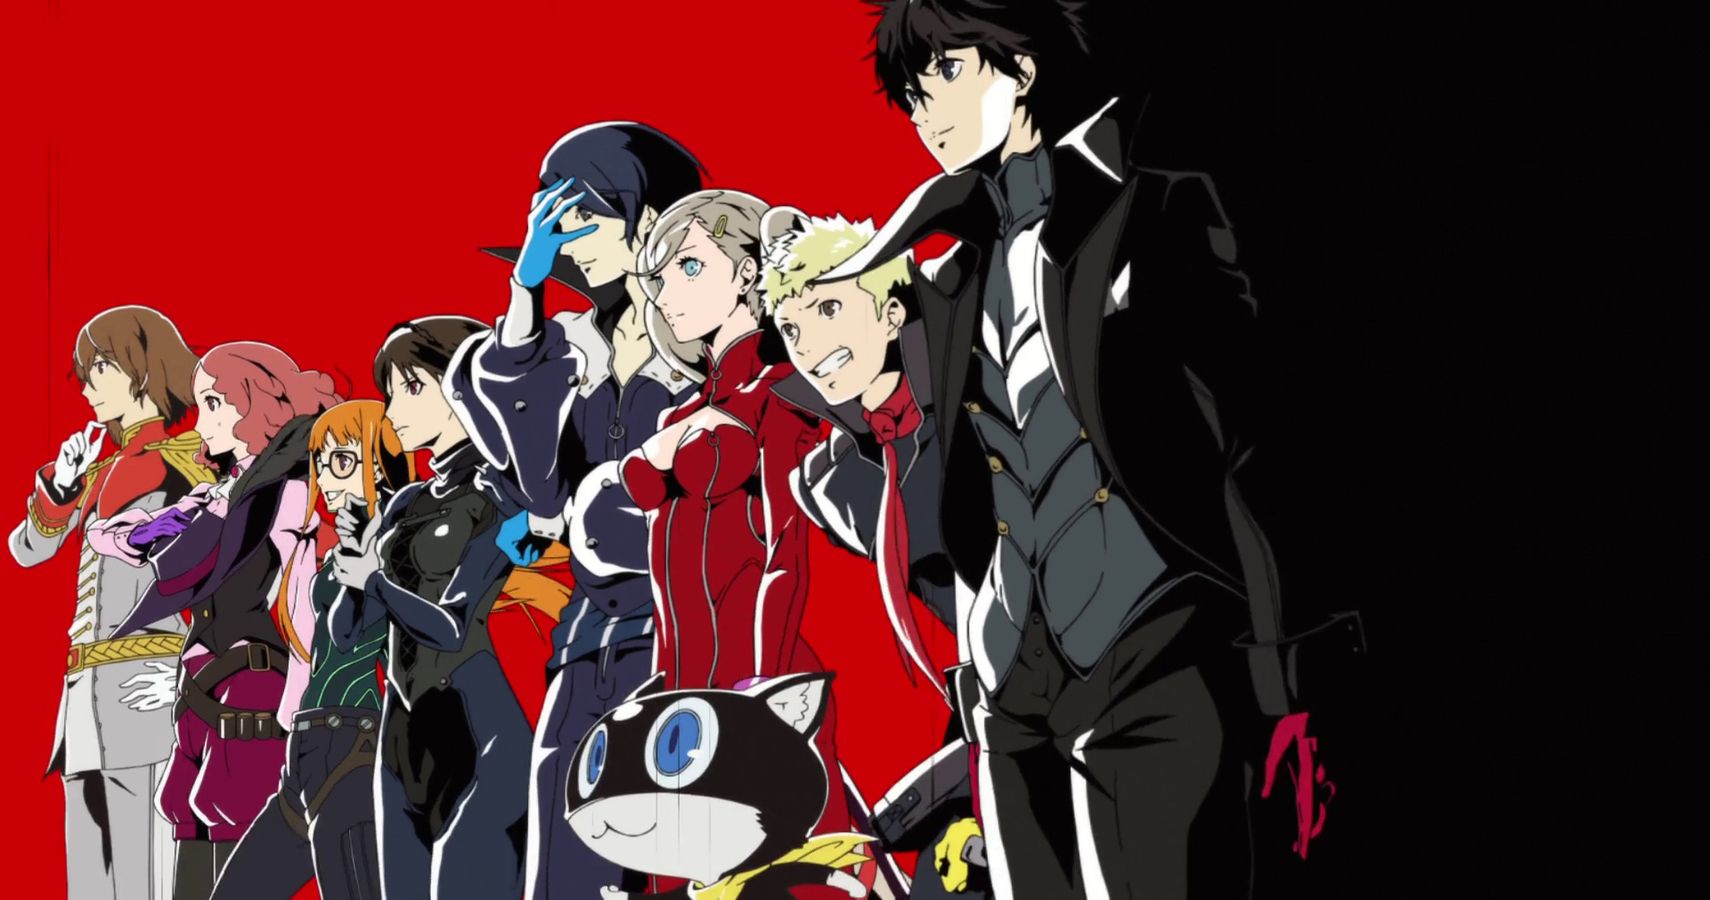 Persona 5 Royal Bosses Ranked From Easiest To Most Difficult